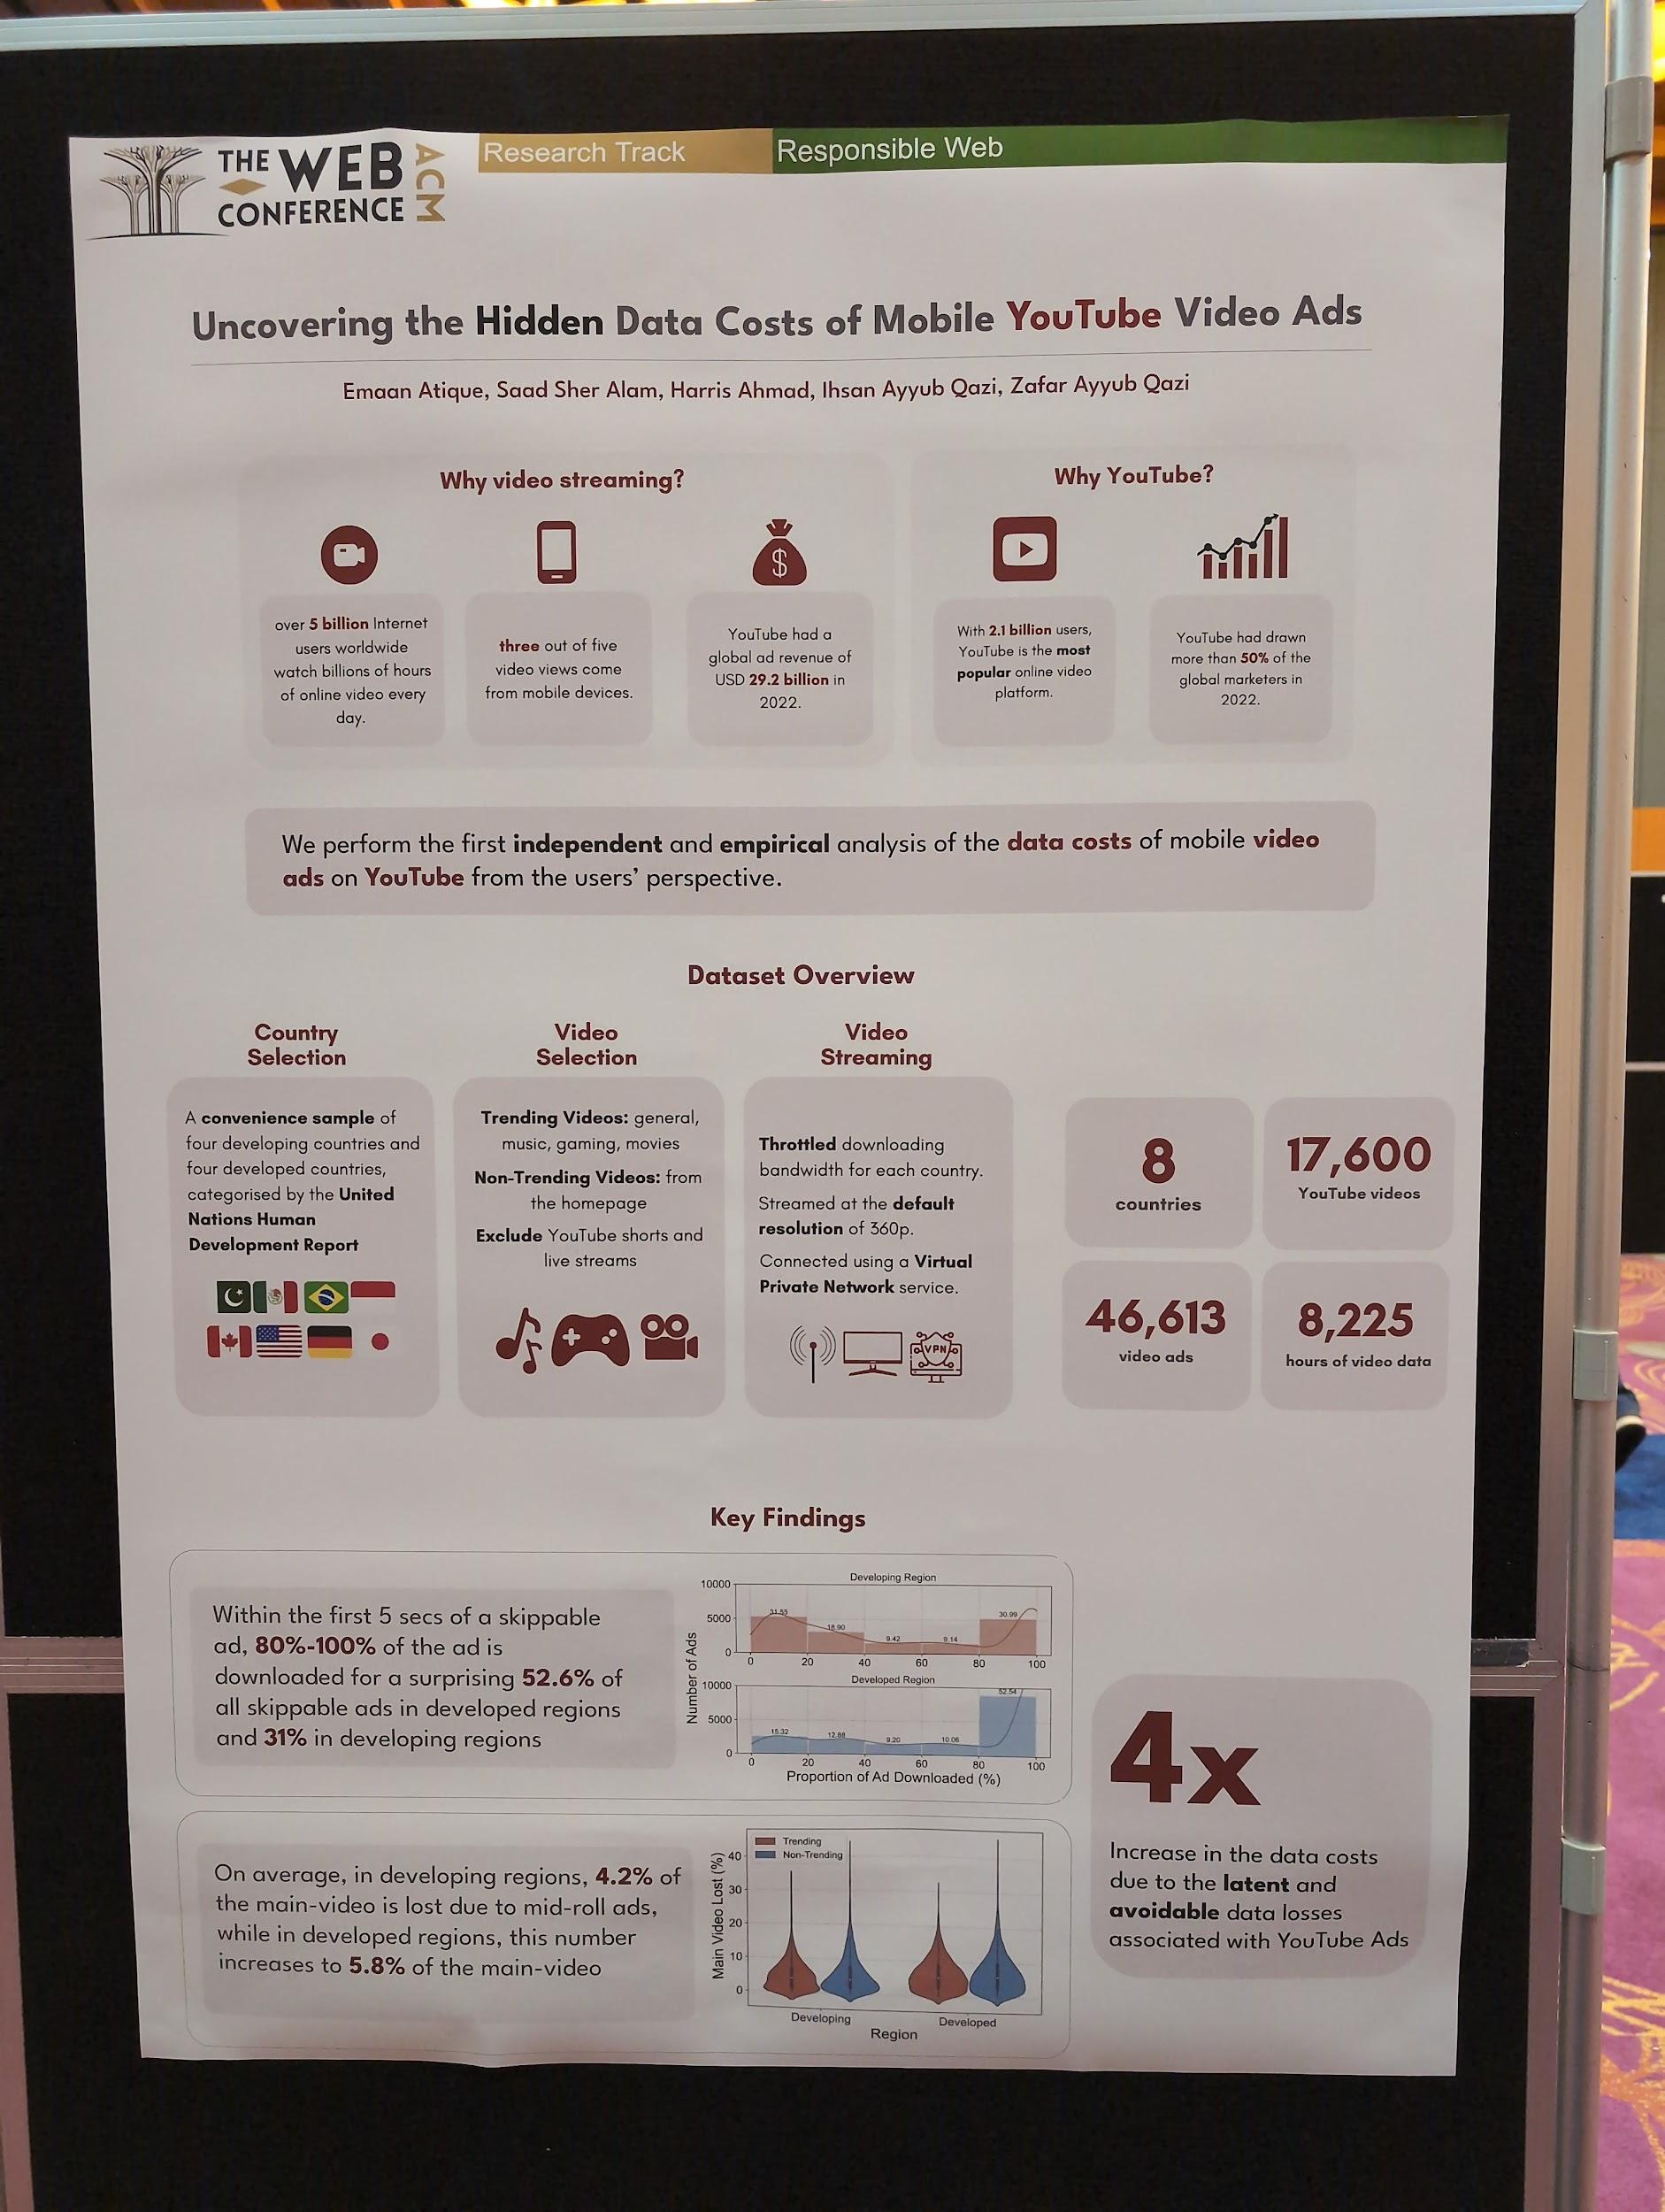 Poster for the 'Uncovering the Hidden Data Costs of Mobile YouTube Video Ads' paper.